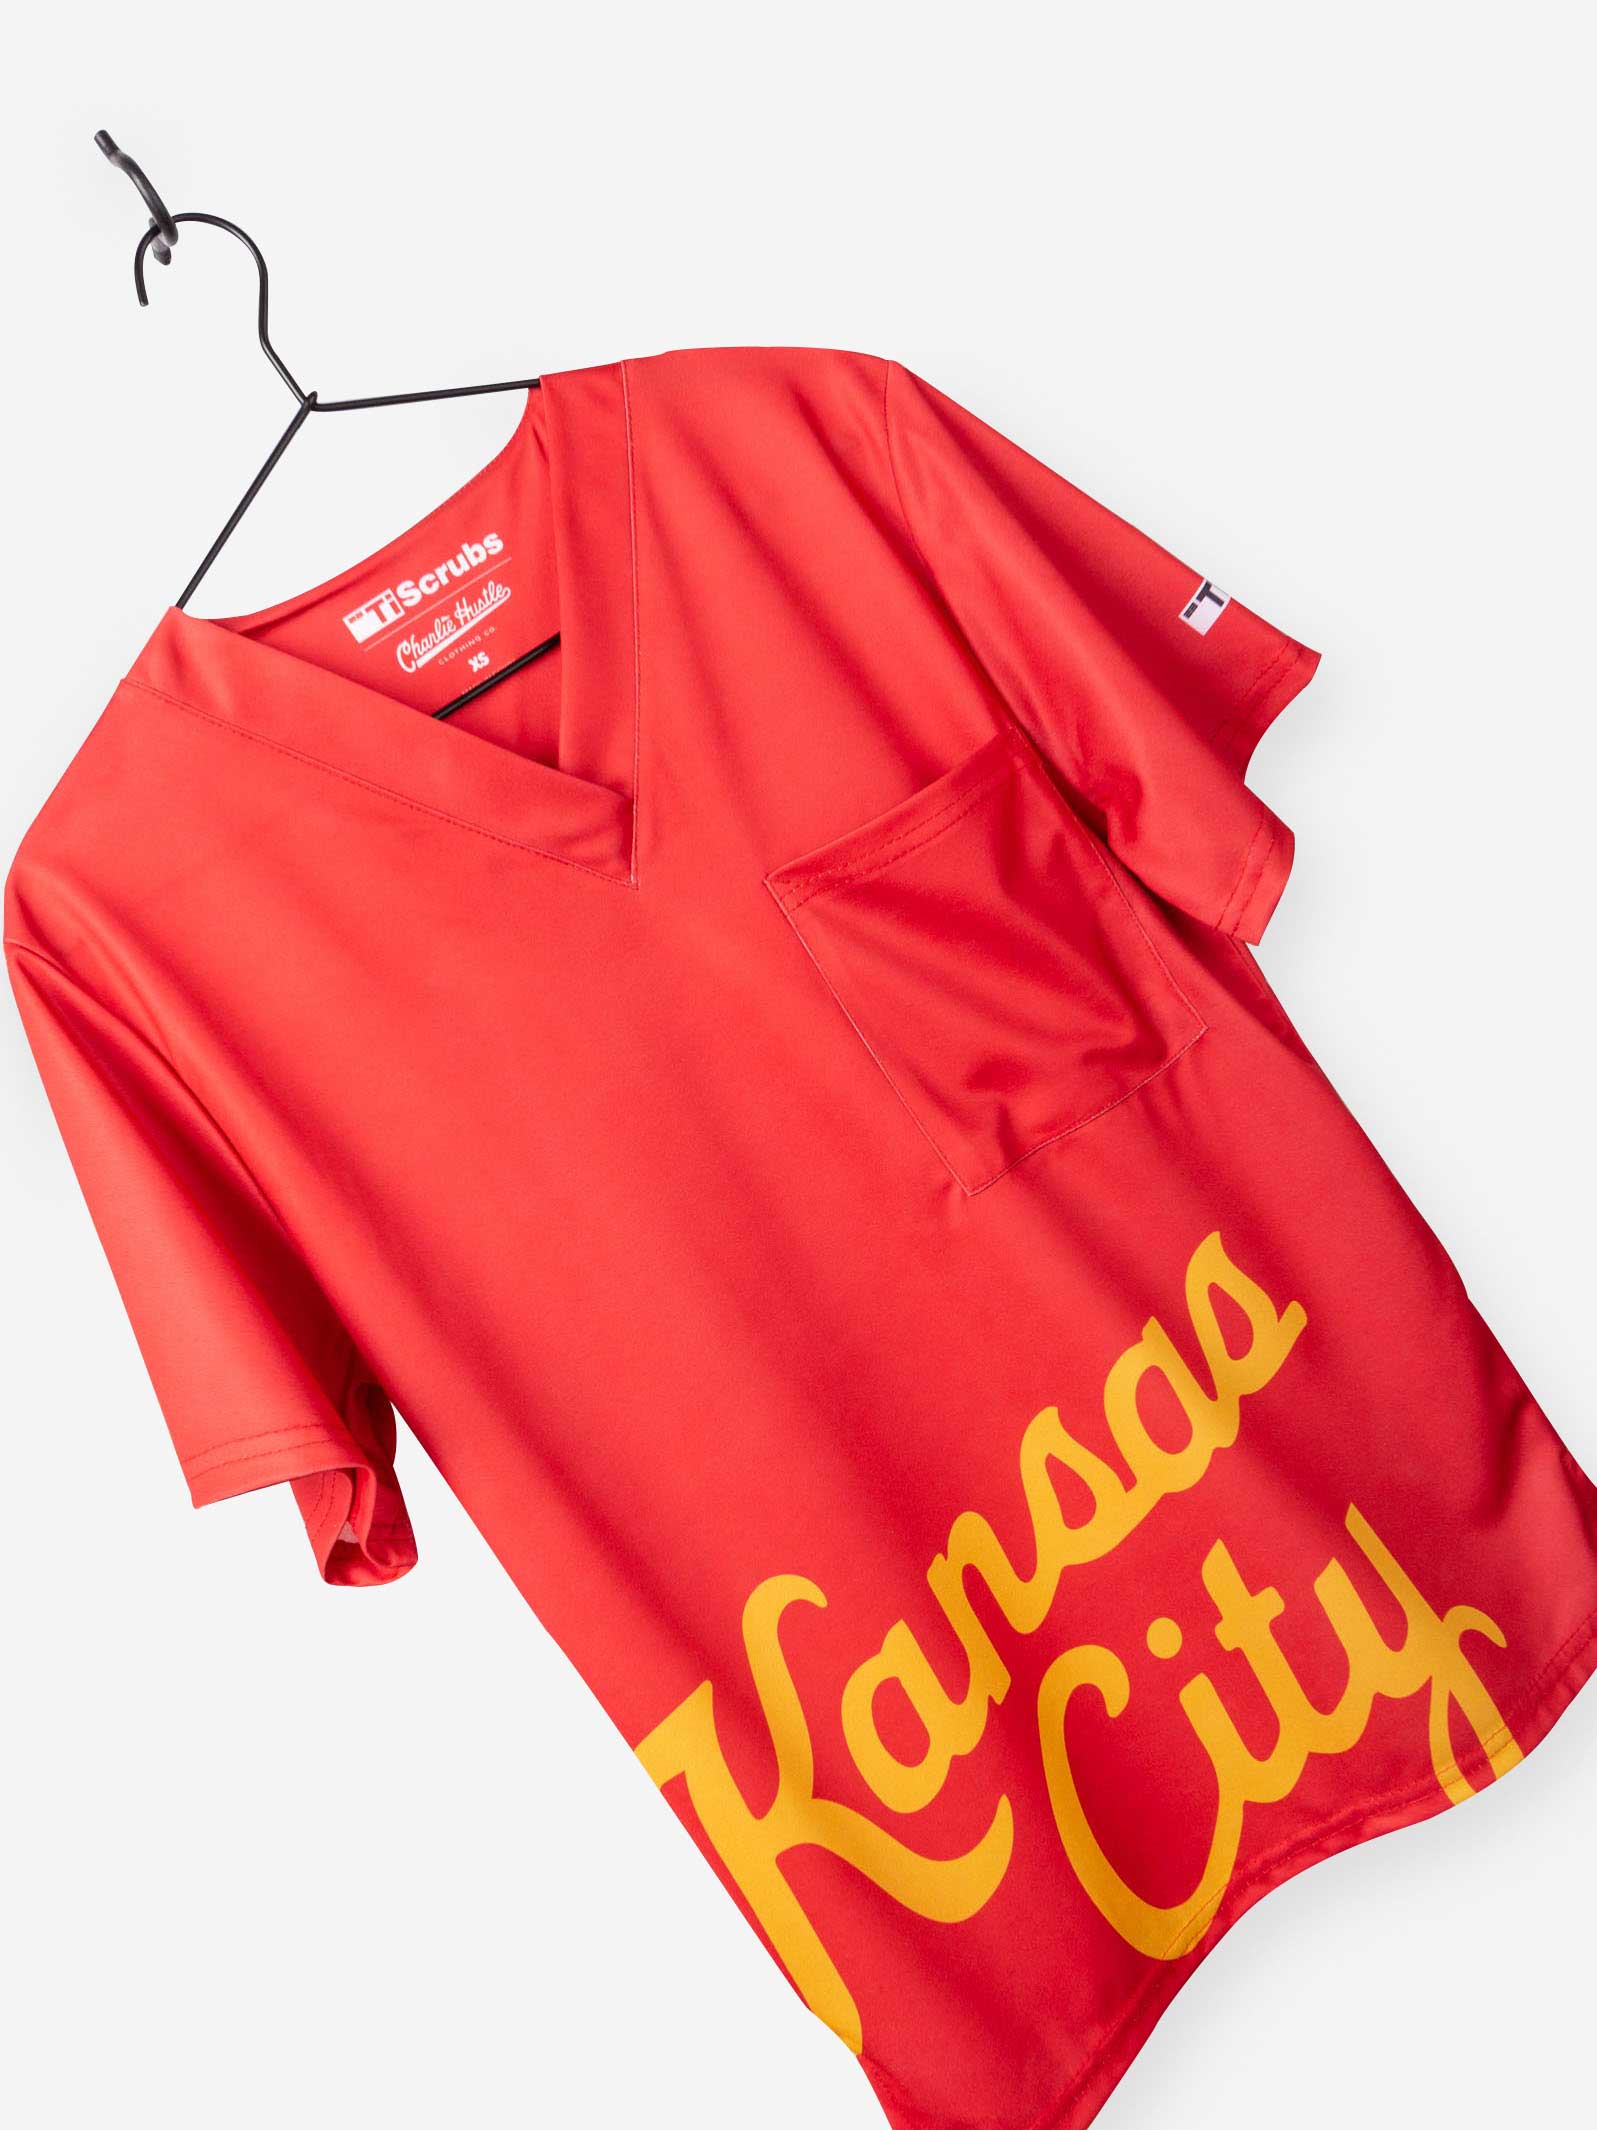 Men's Charlie Hustle Print Scrub Top with Kansas City Script in Red and Gold with Vneck